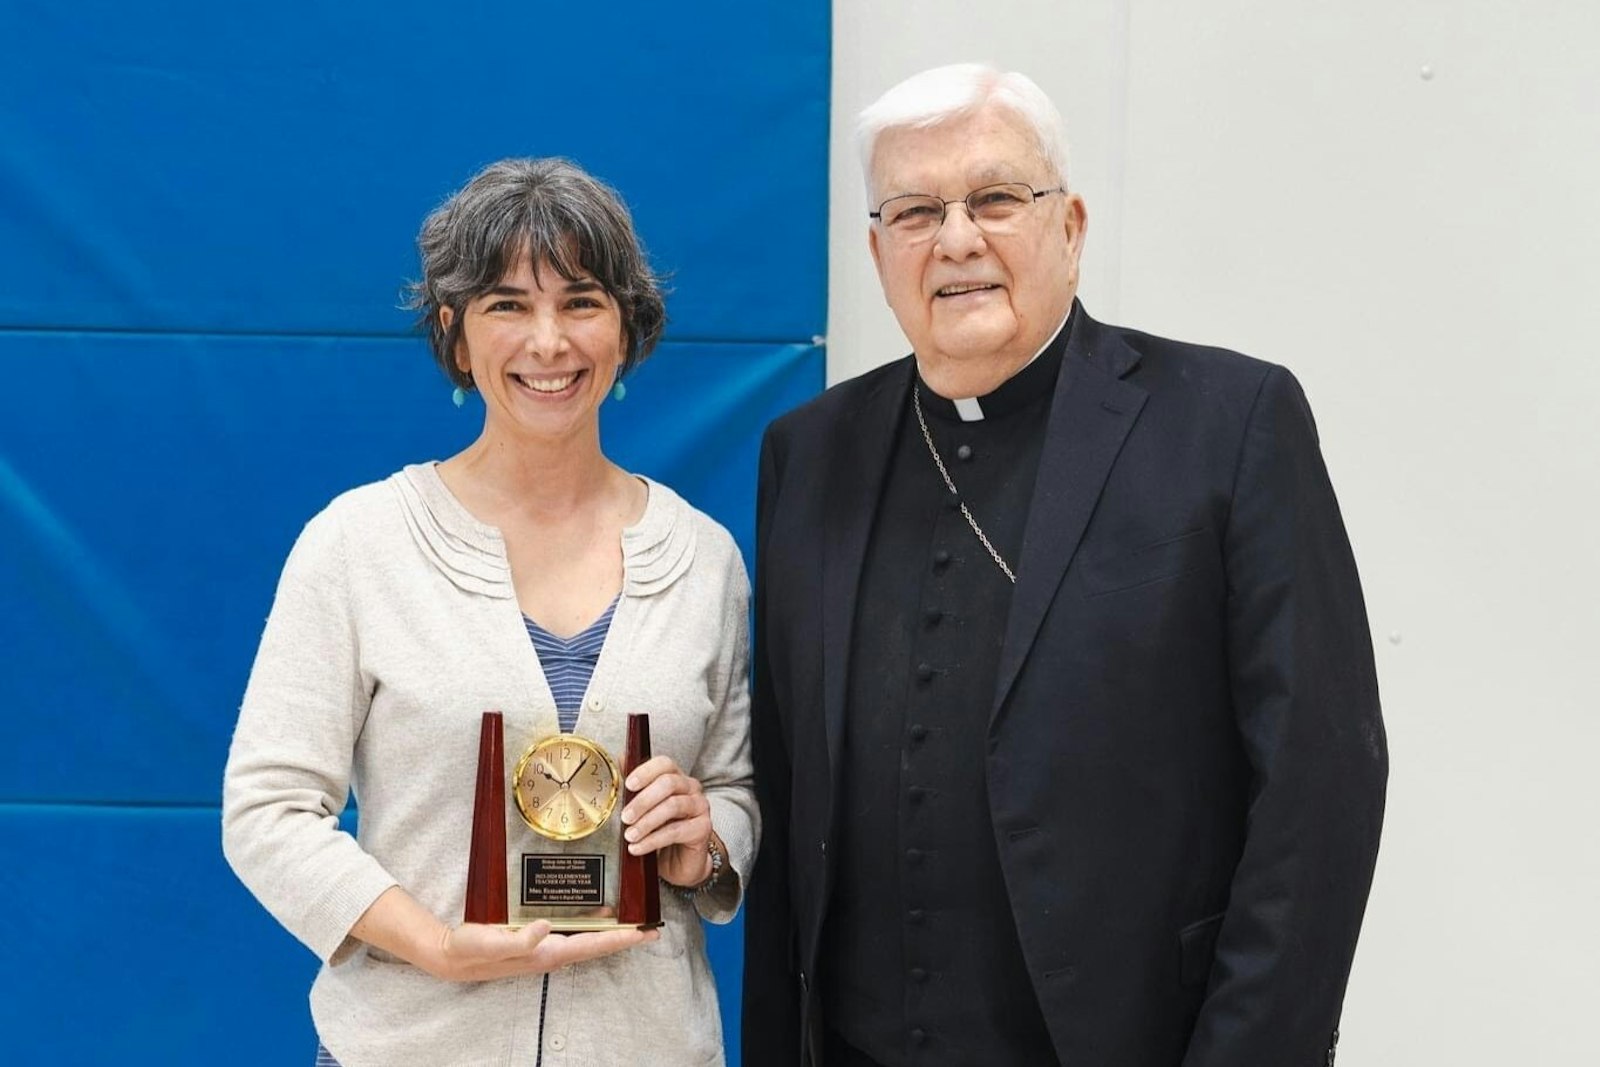 Bishop John M. Quinn presents this year's Bishop John M. Quinn Elementary School Teacher of the Year Award to Beth Decoster, a longtime English teacher at St. Mary School in Royal Oak. (Naomi Vrazo | Special to Detroit Catholic)